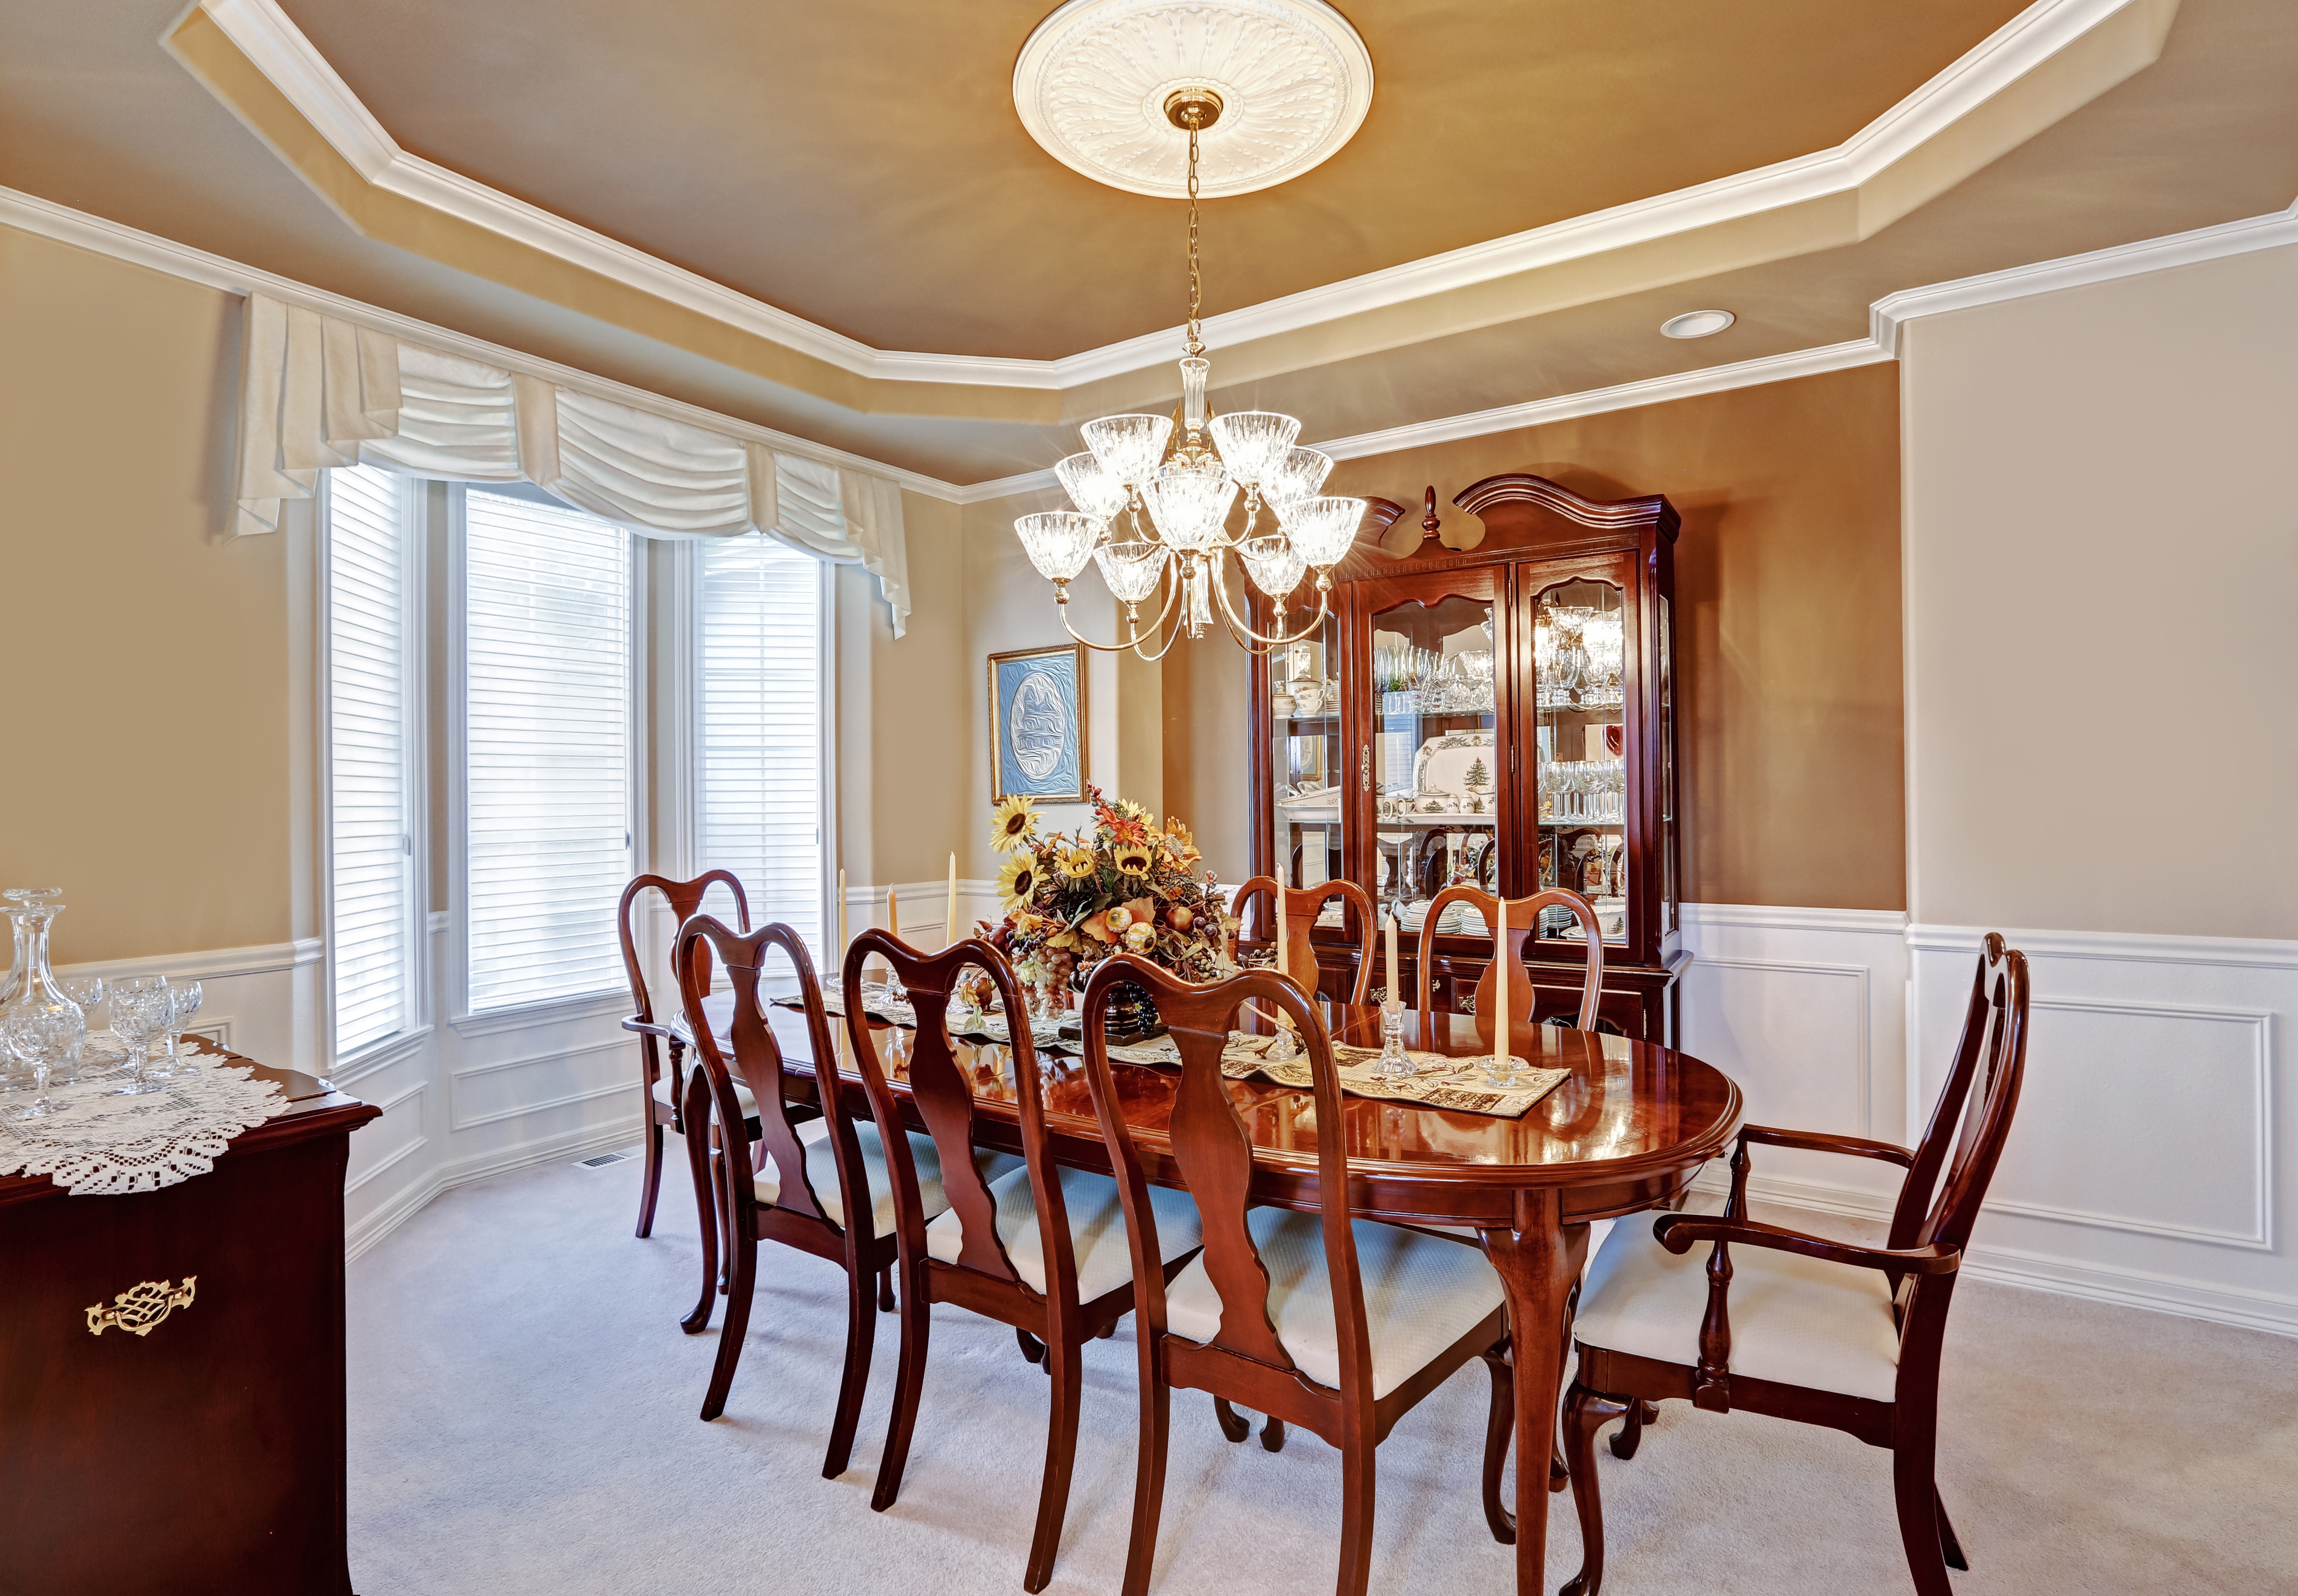 Beautiful dining room interior in luxury house. Wooden dining table set blend perfectly with light brown walls and white trim